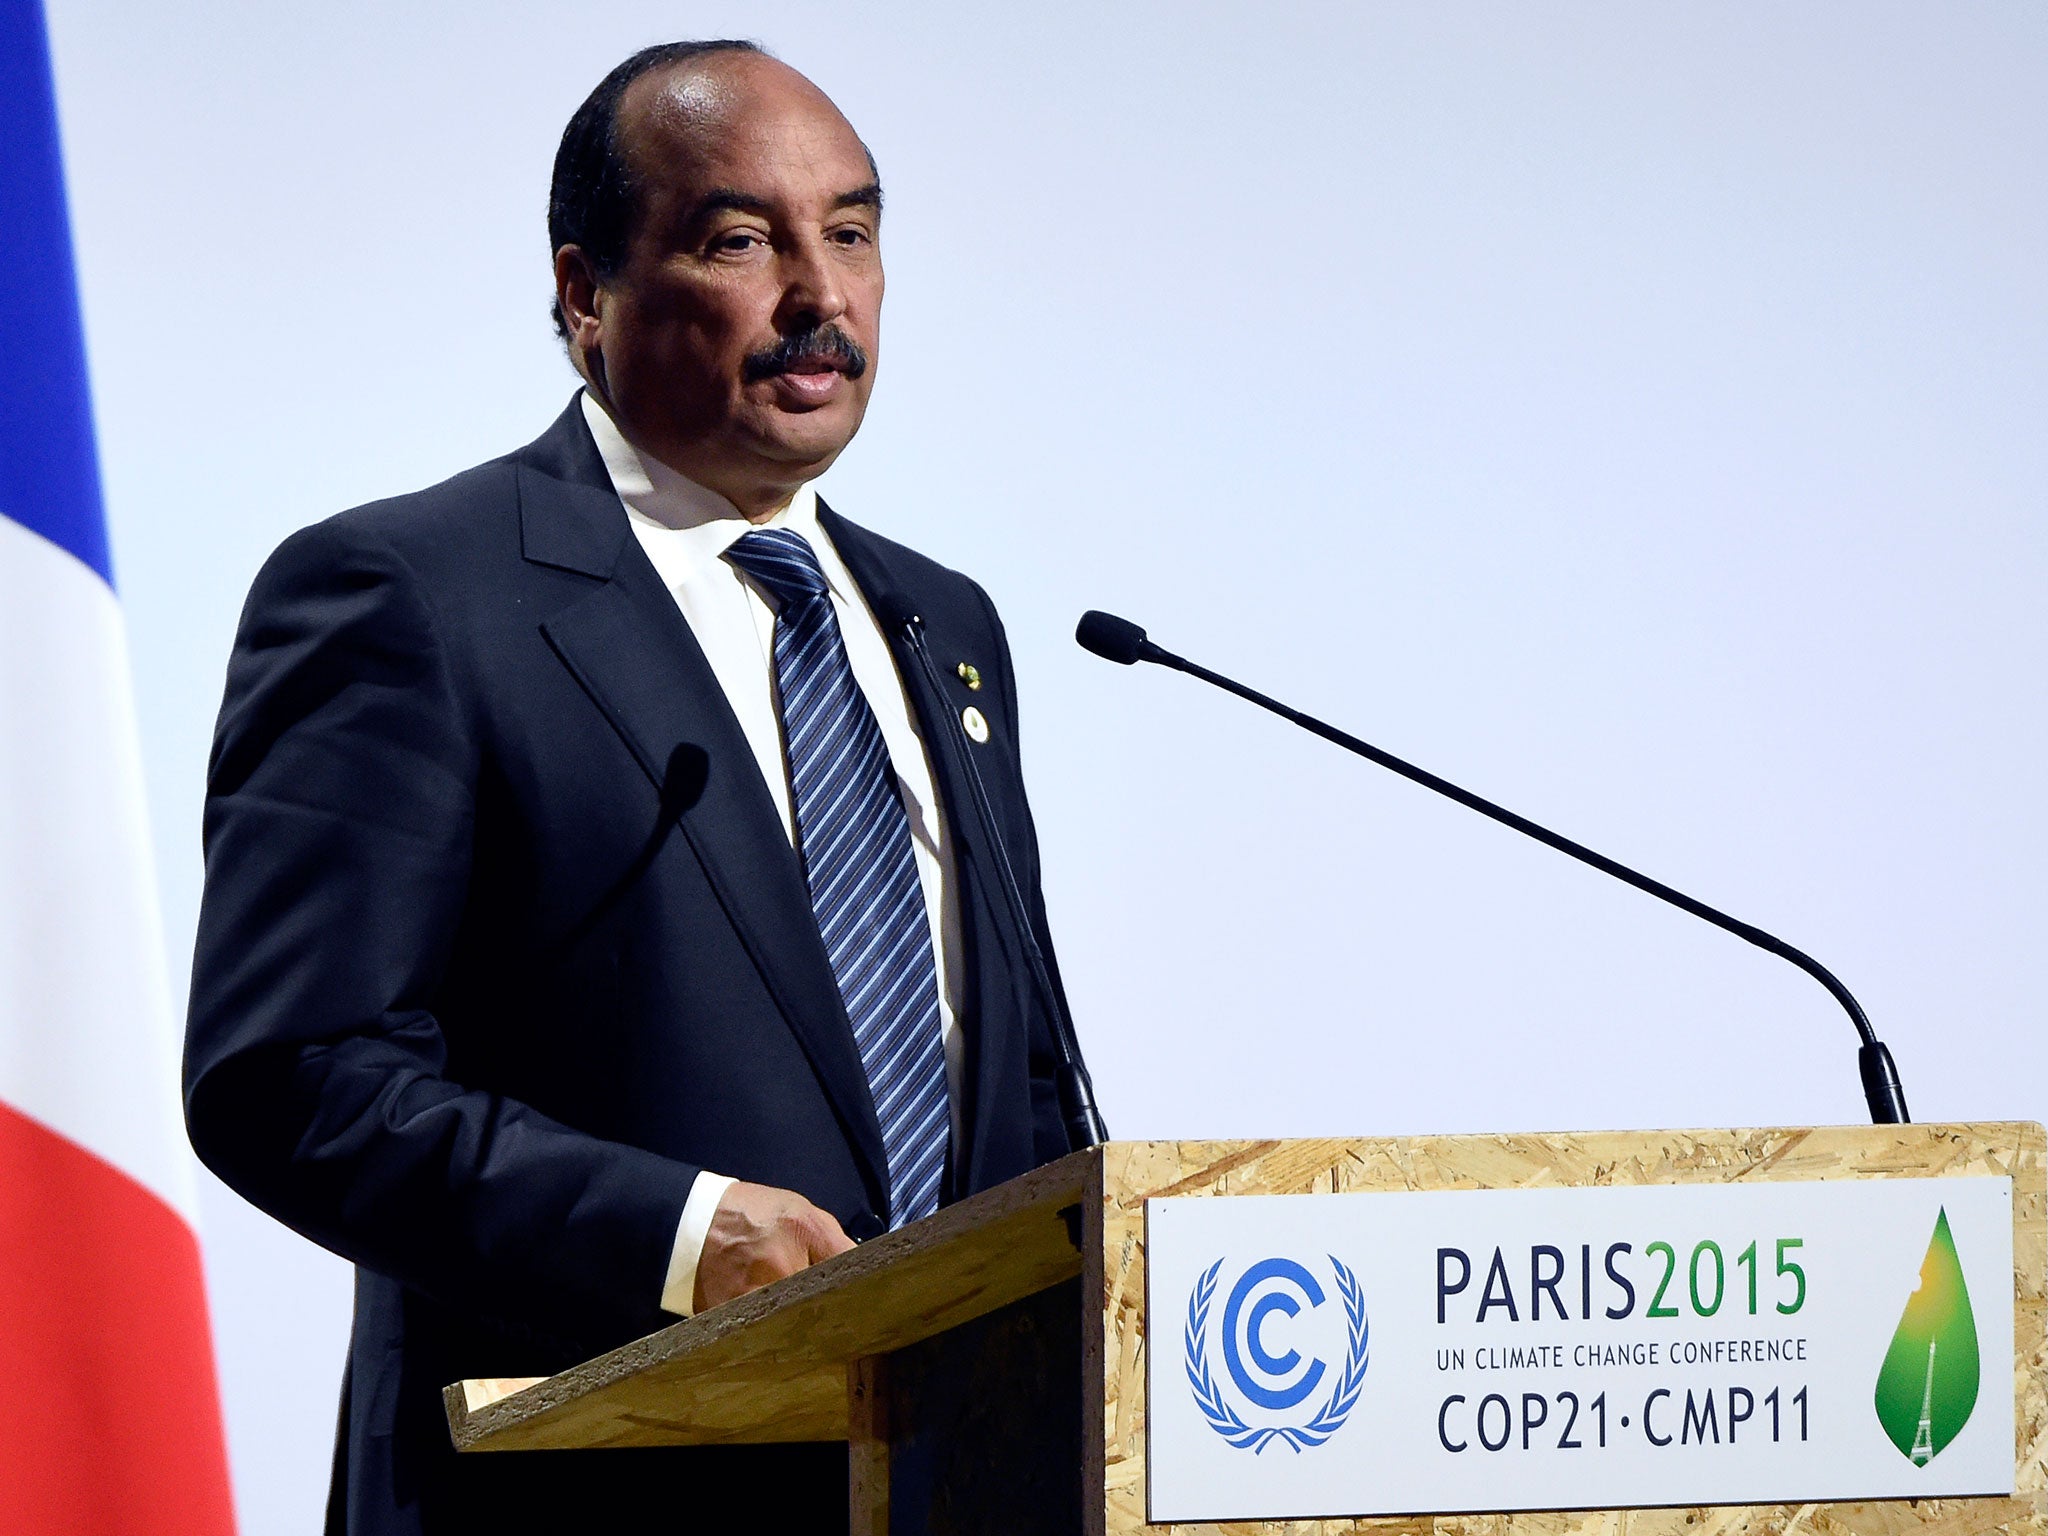 Mohamed Ould Abdel Aziz speaking during the world climate change conference